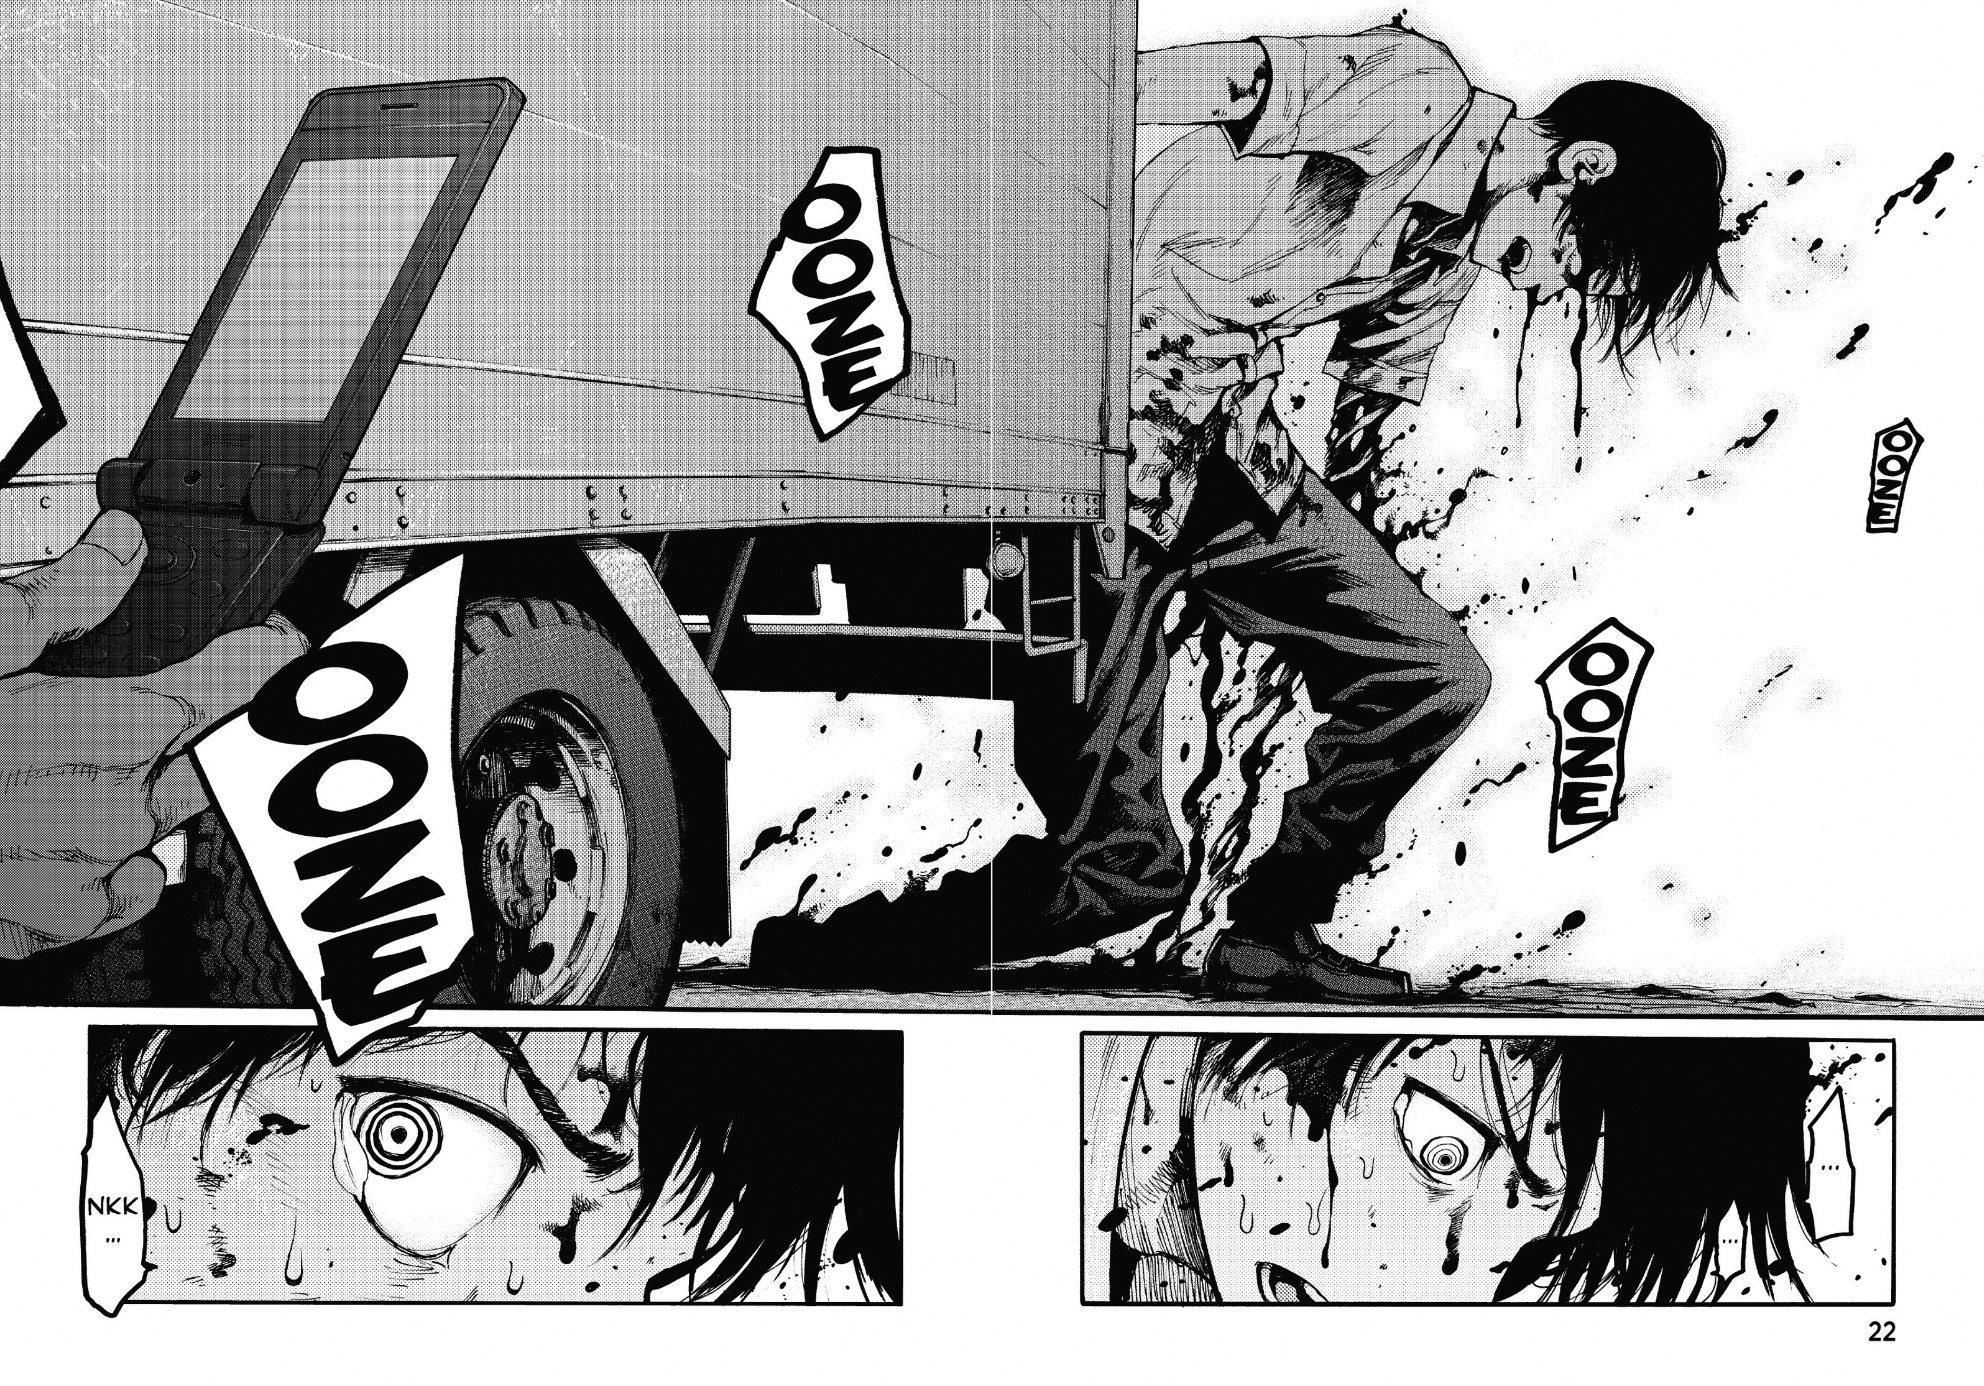 Kei after the accident from Ajin vol. 1